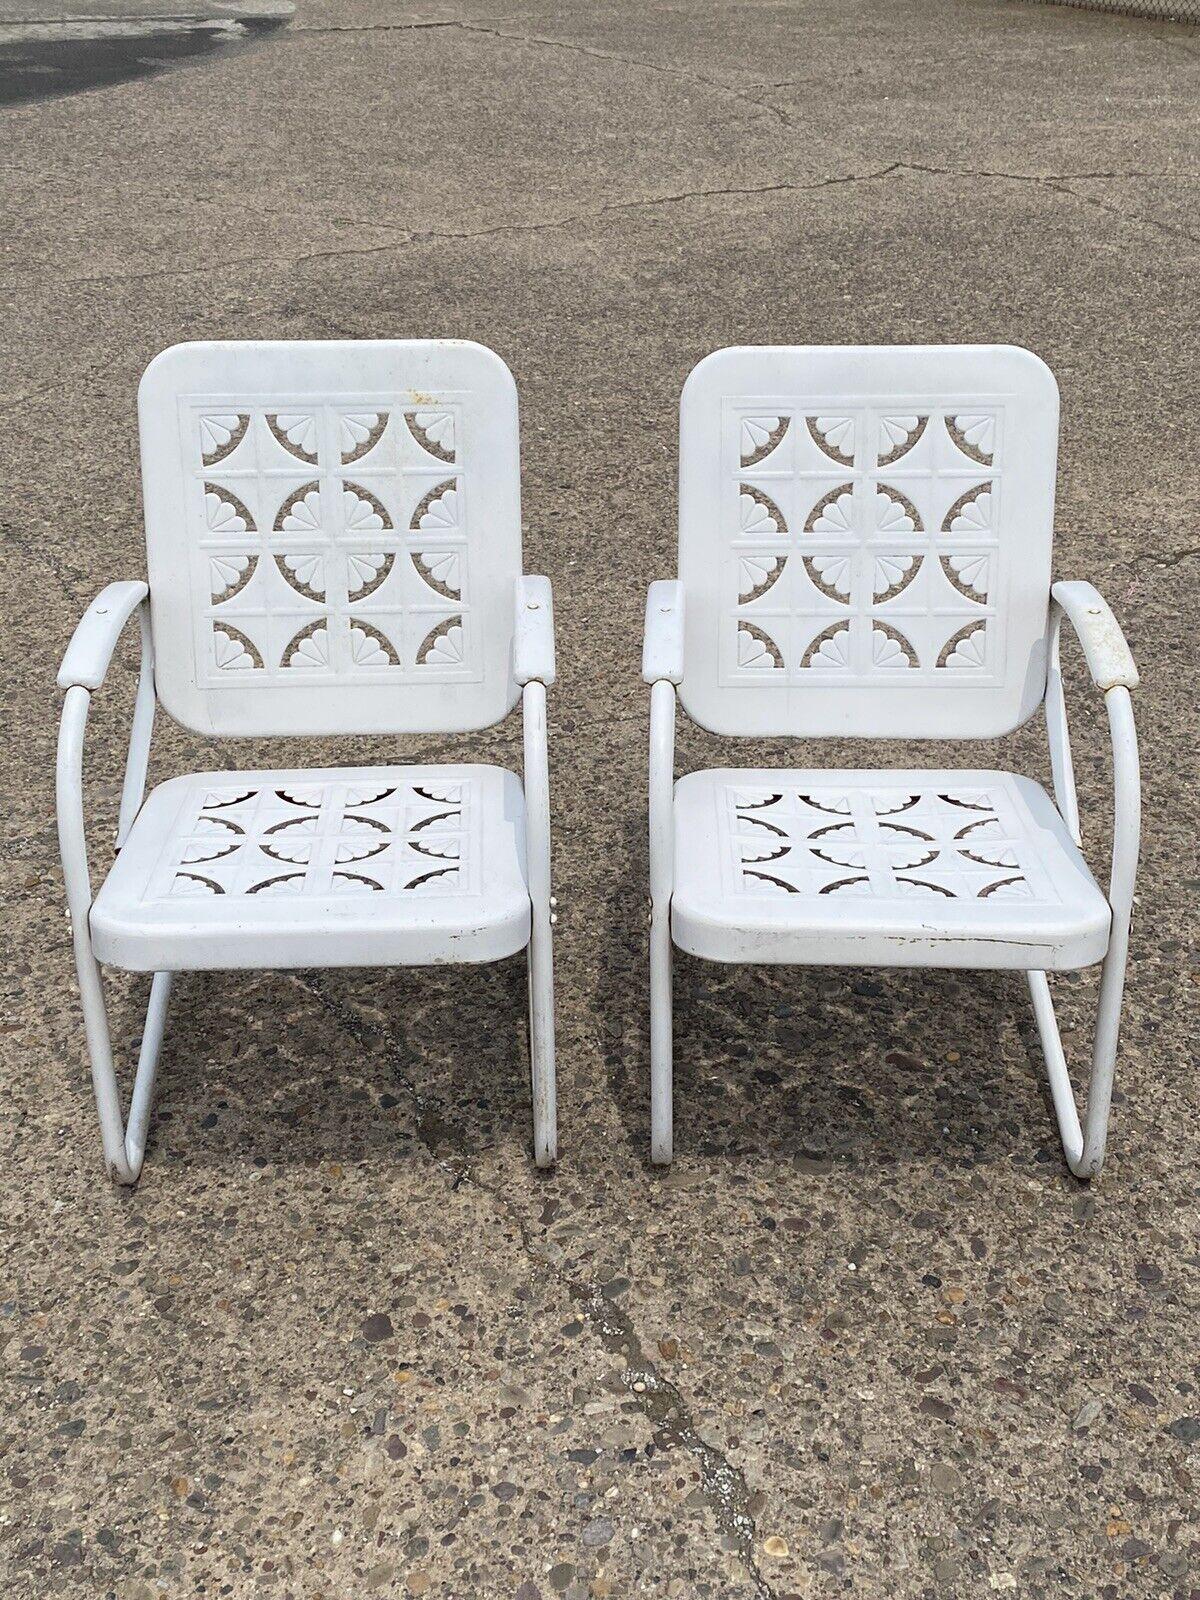 Vintage Starburst Pie Crest Metal Outdoor Patio Springer Lounge Chairs - a Pair. Circa Early to Mid 20th Century. Measurements: 35